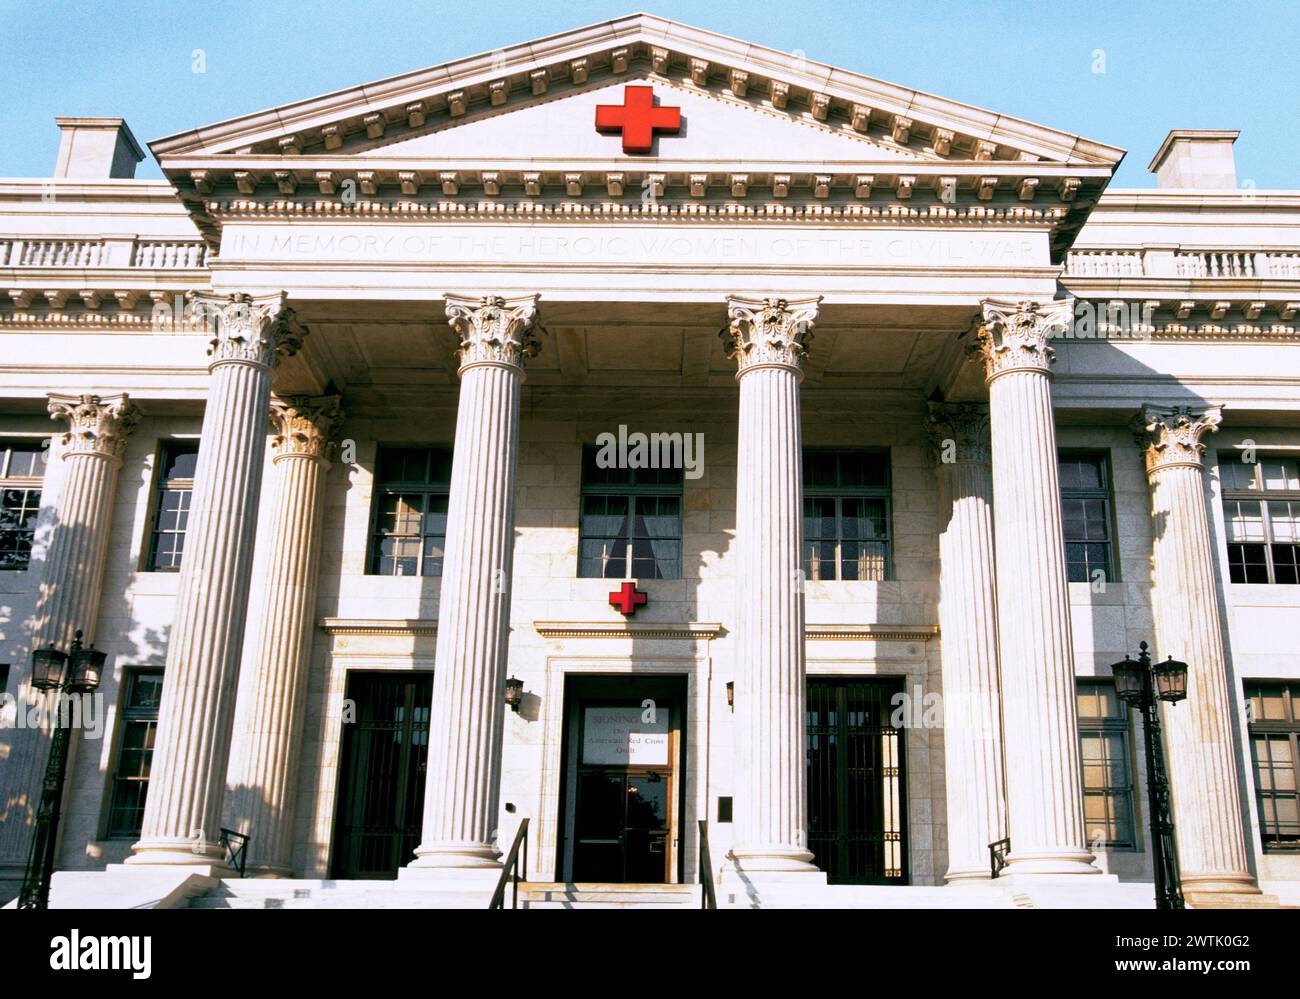 Historic American Red Cross Building dedicated to the heroic nurses of the Civil War. Build in the style of the 'old South'. Washington DC USA Stock Photo